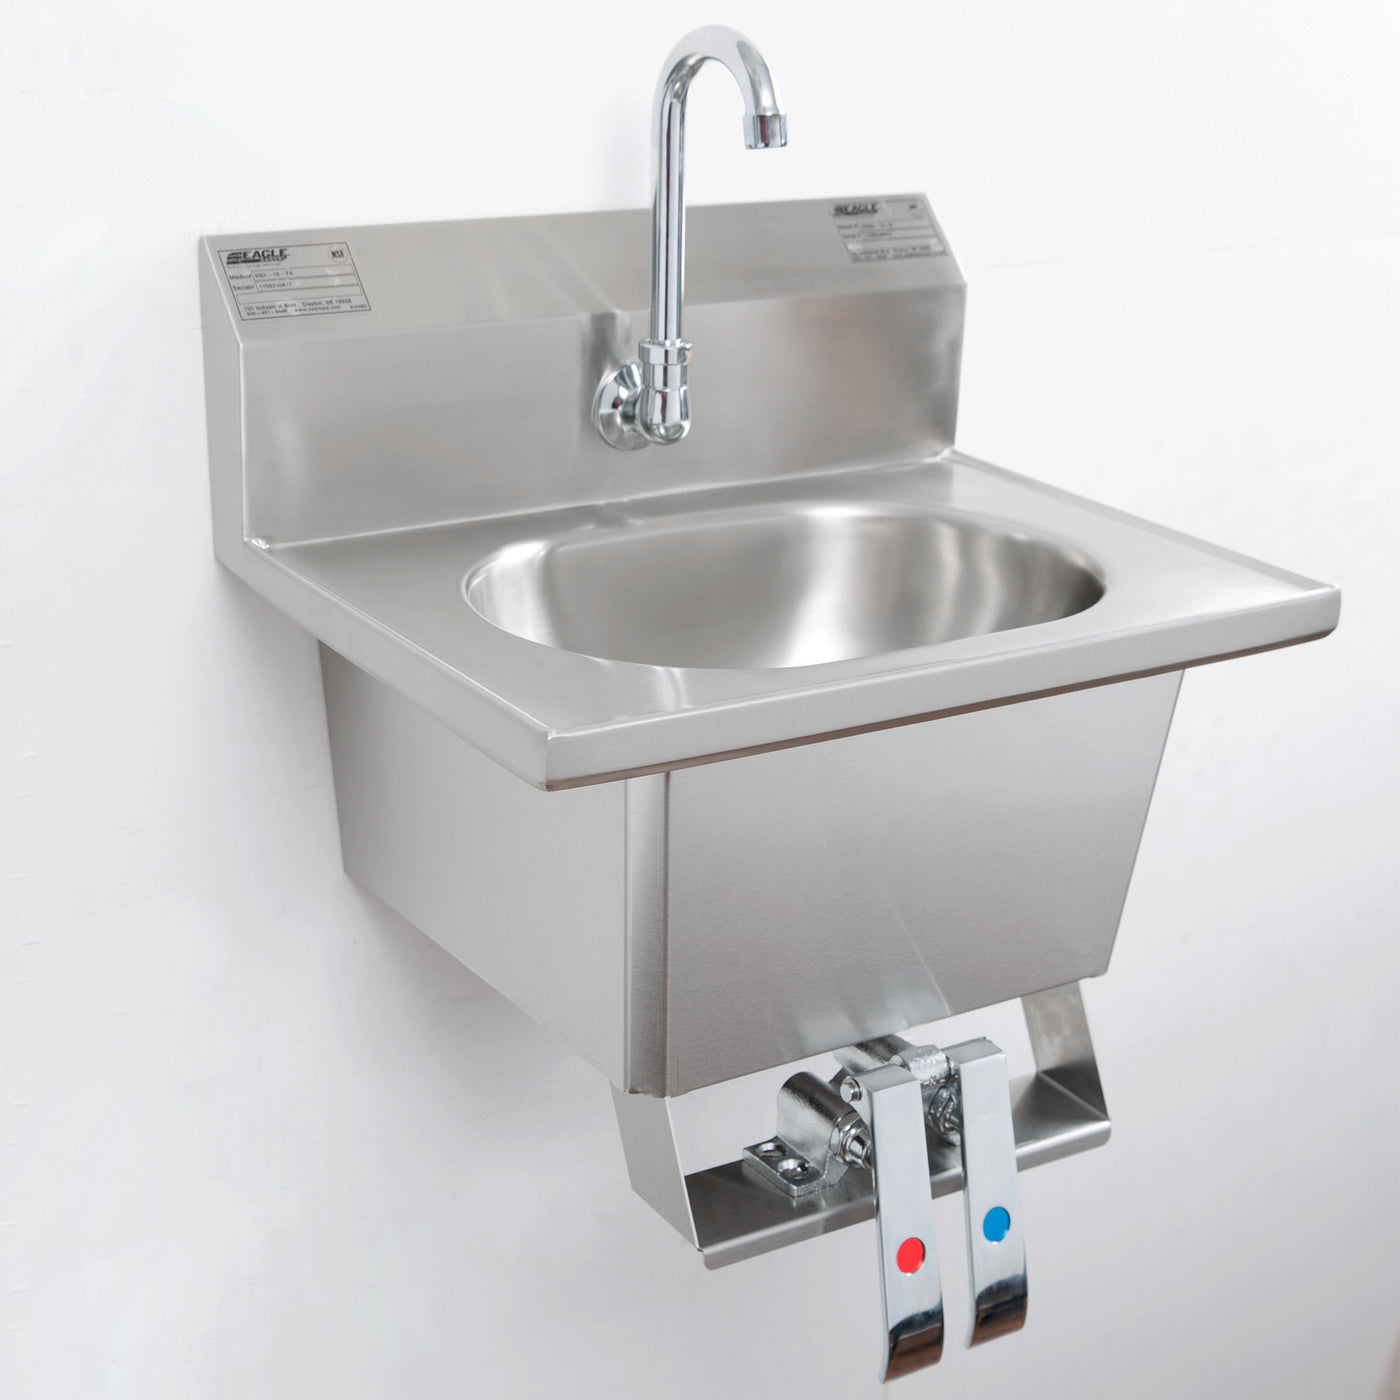 Eagle Group Hsa 10 Fk 13 5 Hand Sink Knee Operated Wall Mount Hand Sink With Gooseneck Knee Pedals Skirt And Basket Drain